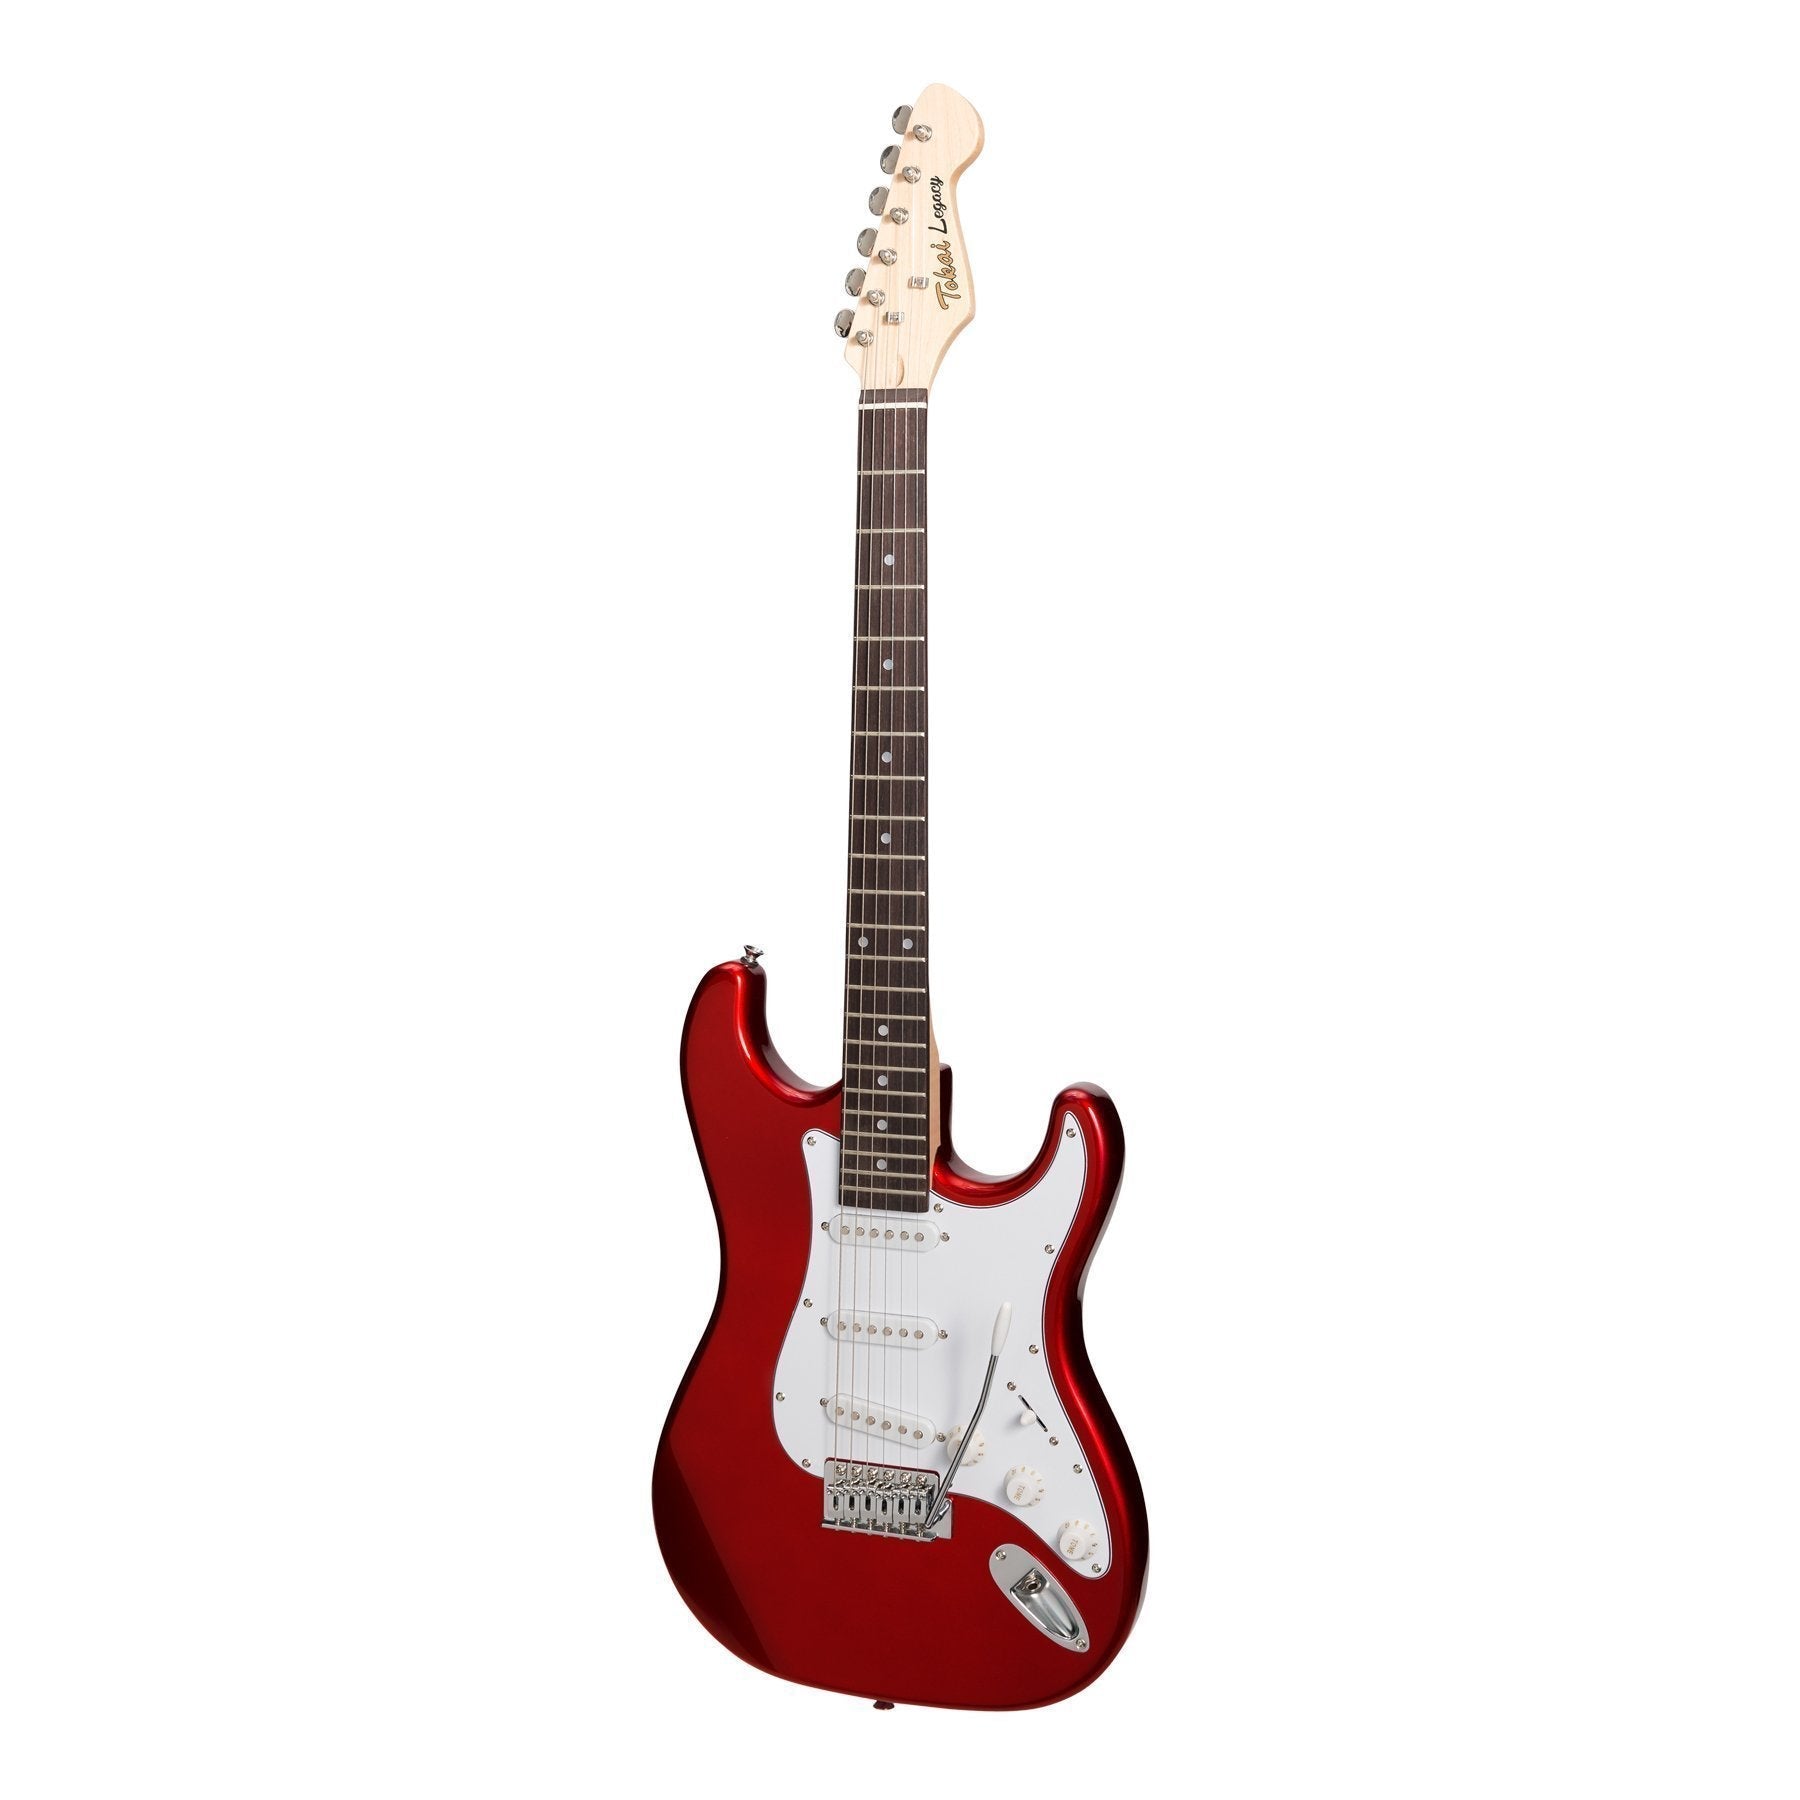 Tokai 'Legacy Series' ST-Style Electric Guitar (Candy Apple Red)-TL-ST-CAR/R